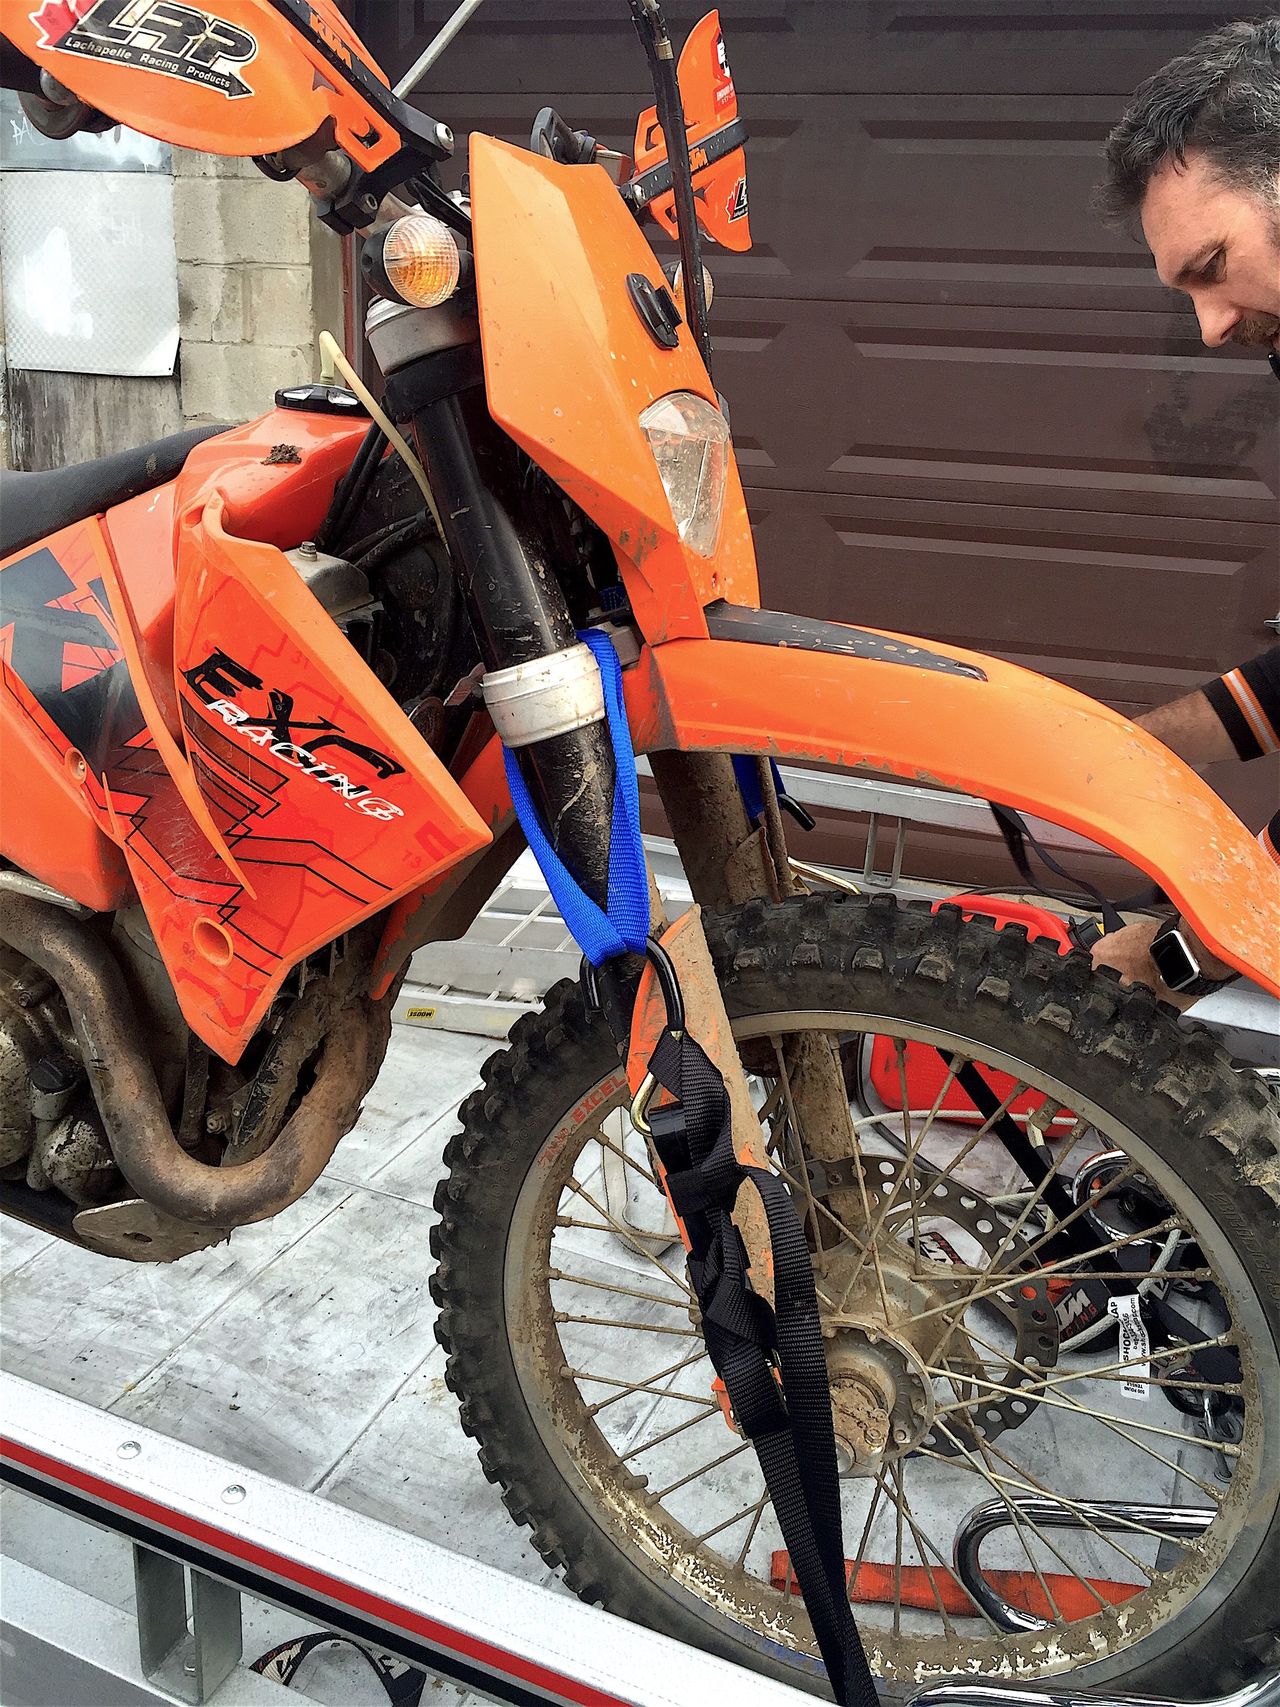 Shock Straps on the KTM – The best tie downs that money can buy